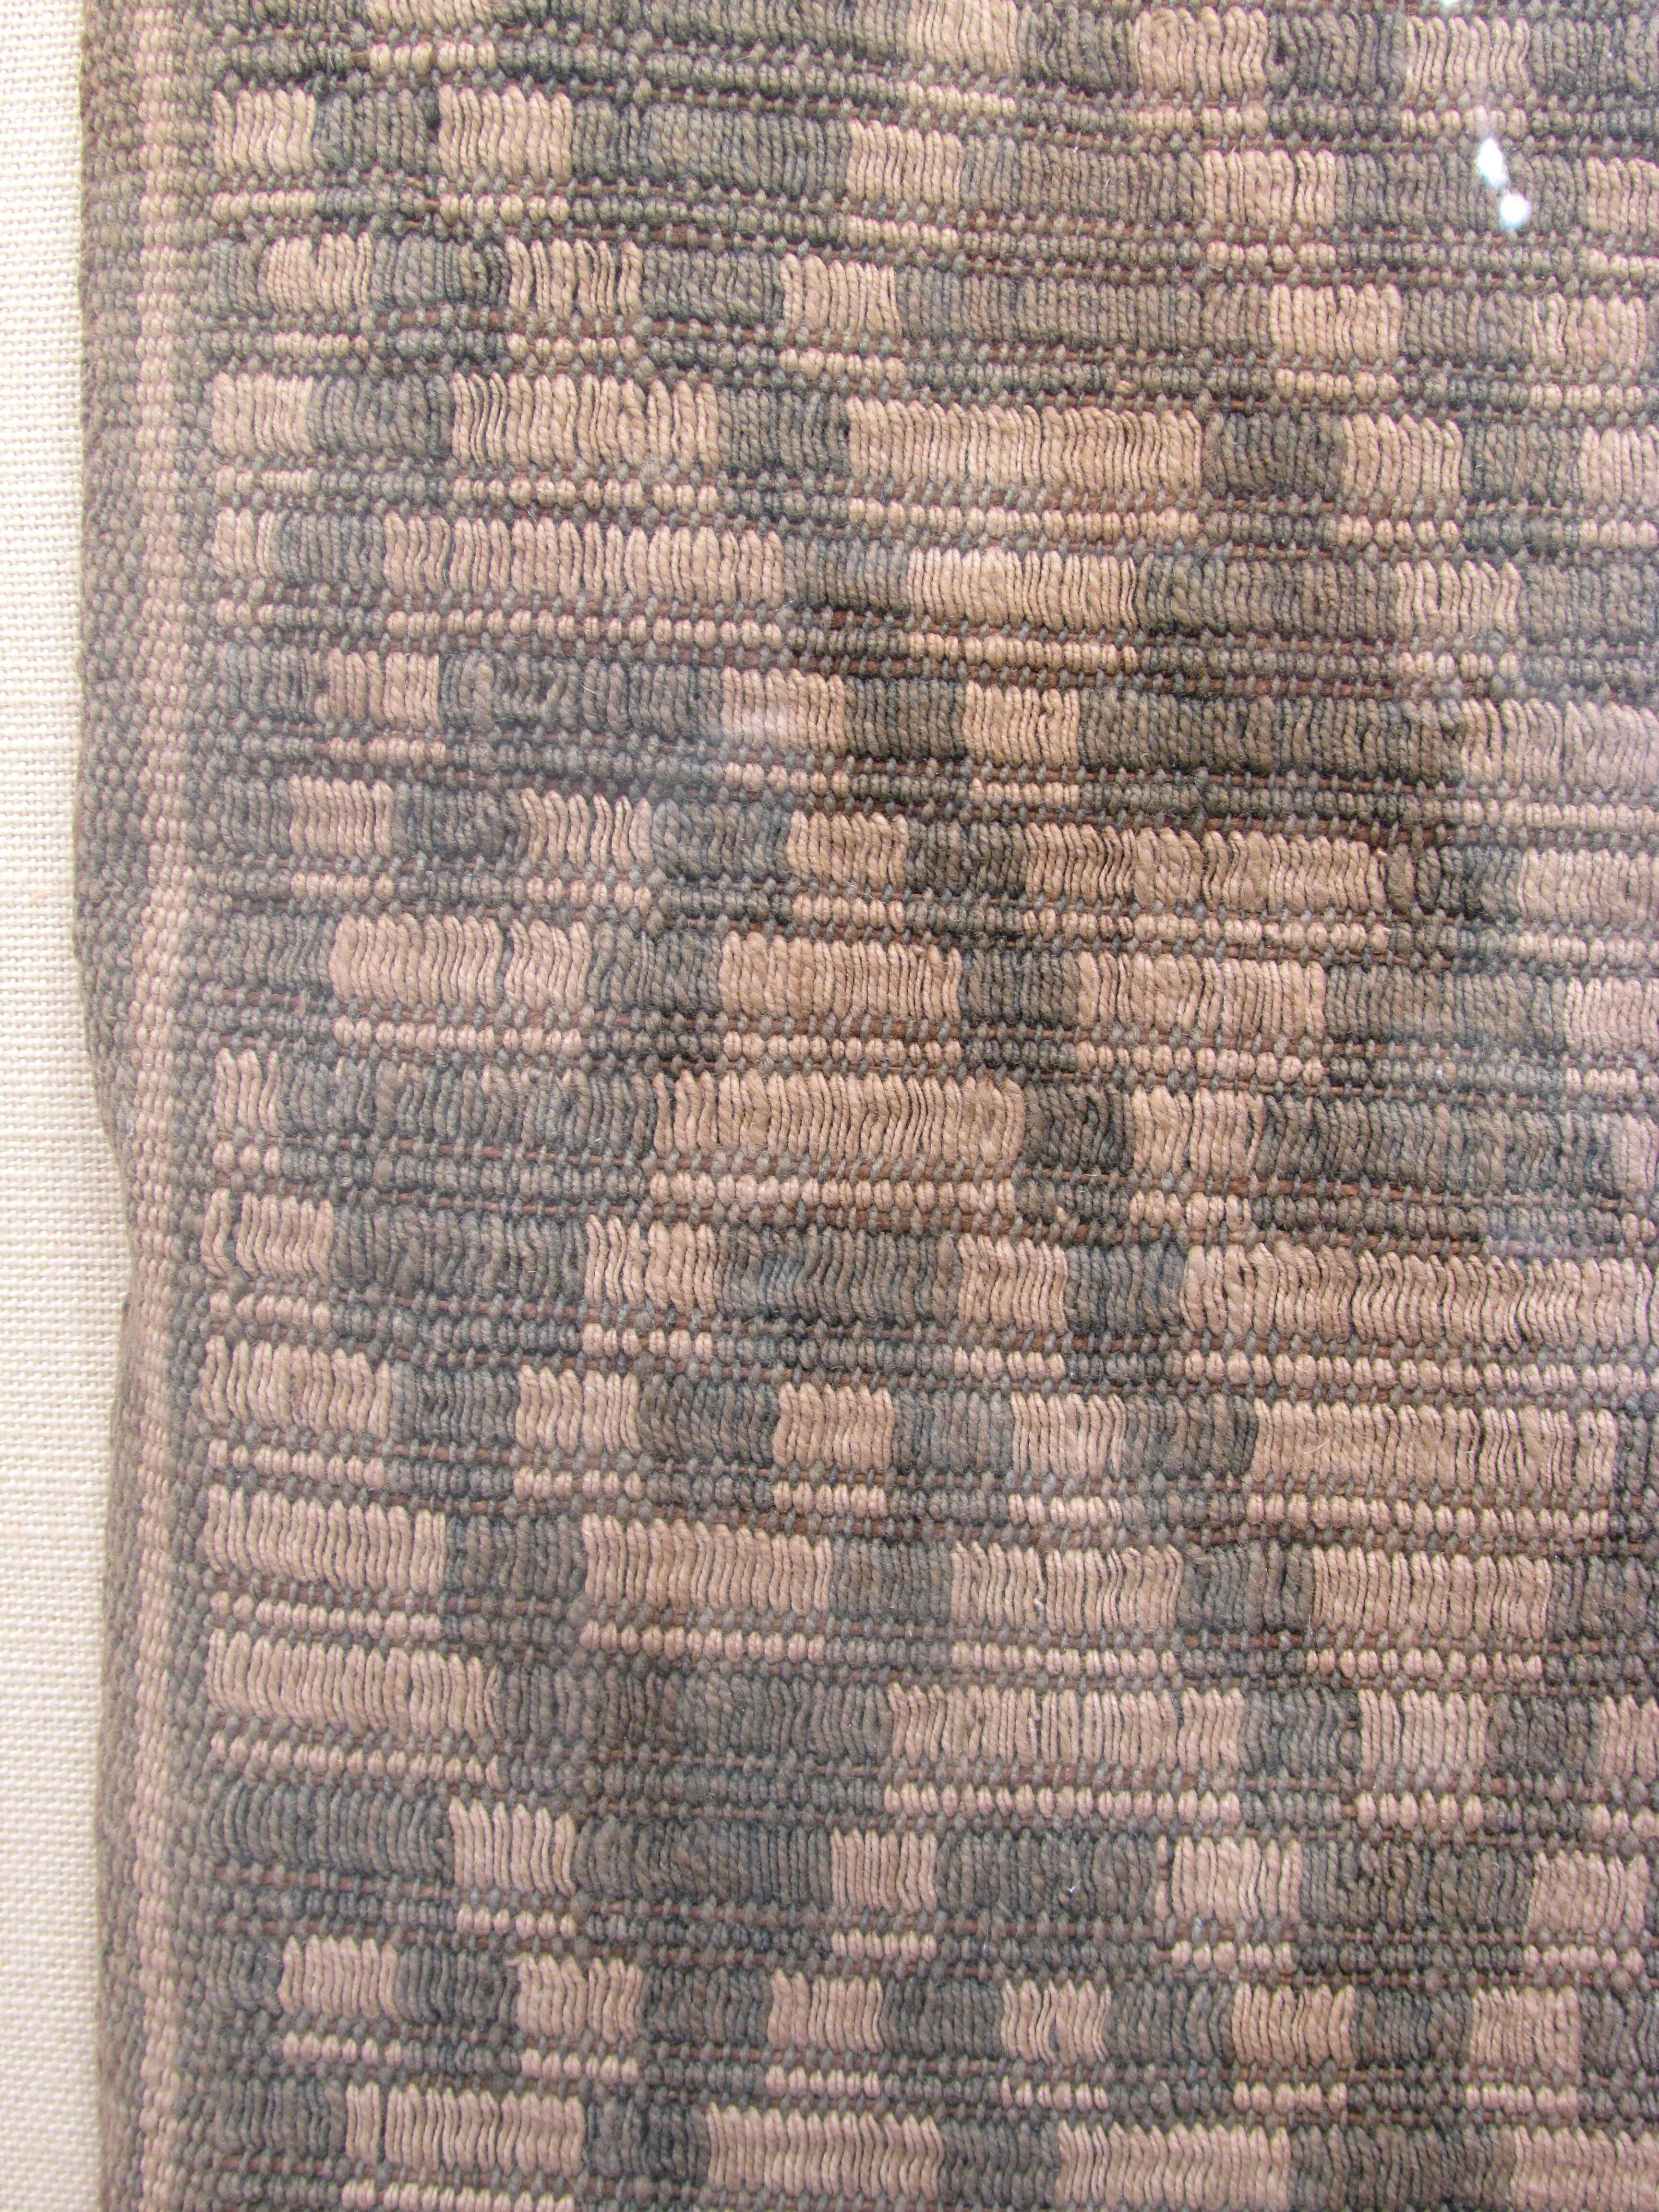 Pre-Colombian Fabric from Peru 4